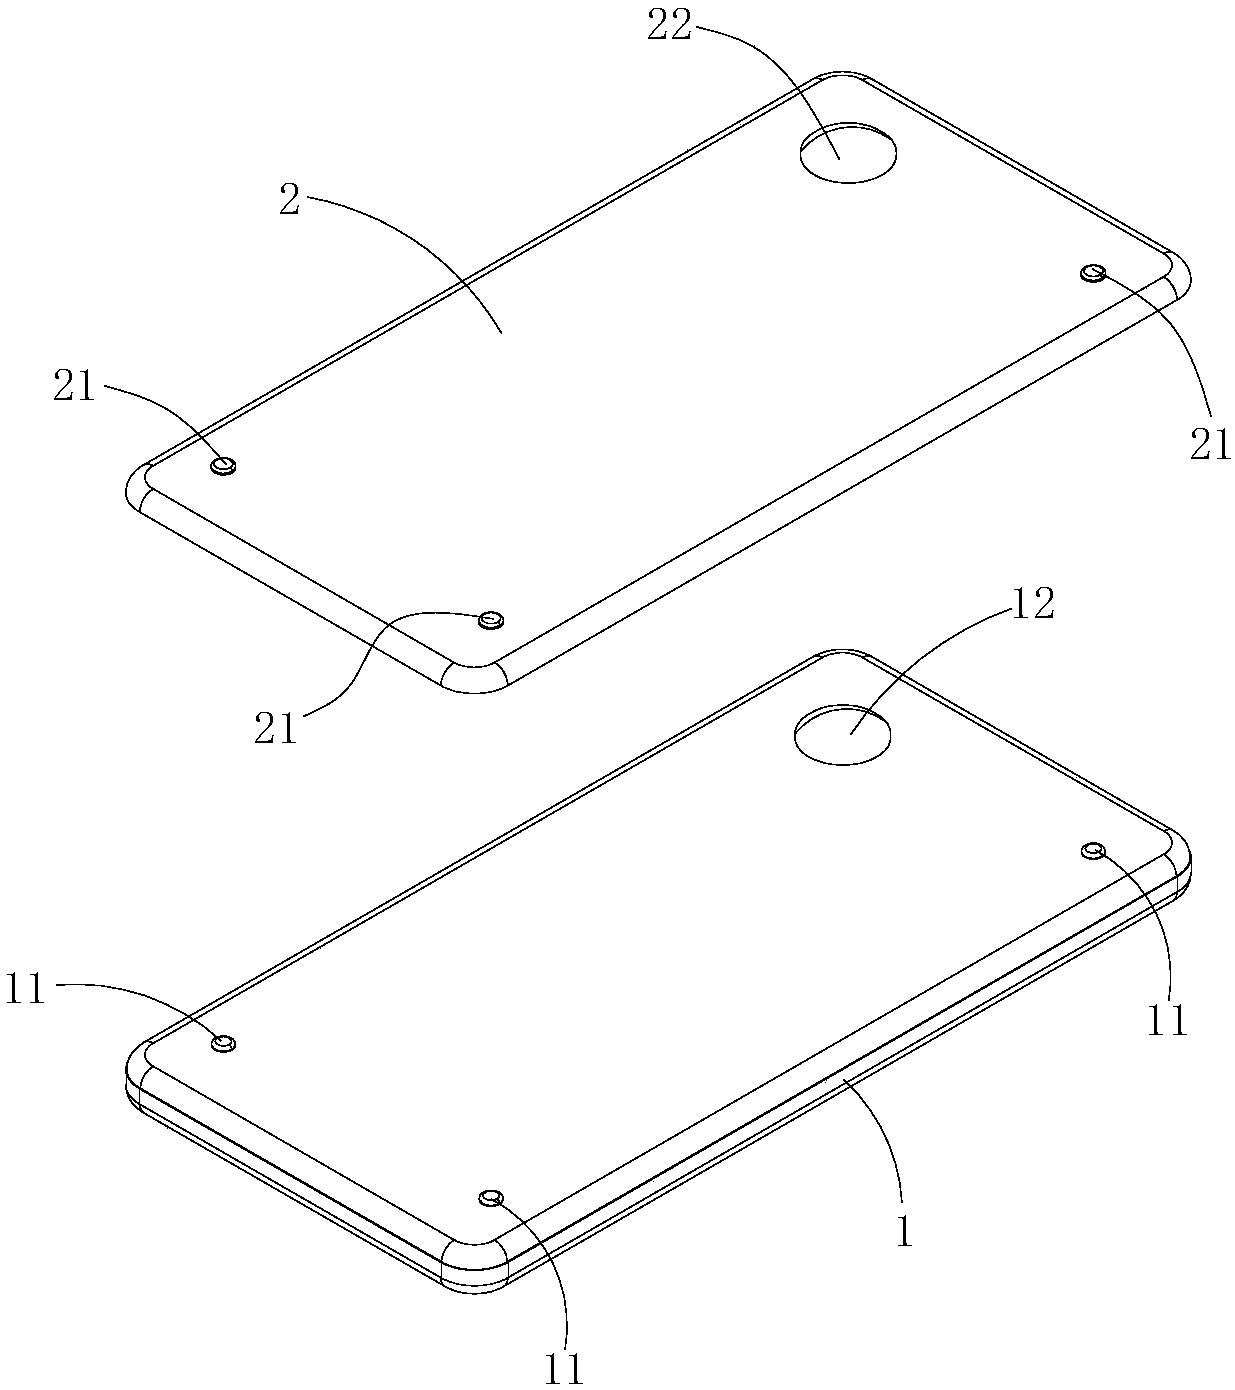 Cover body, diaphragm and electronic device